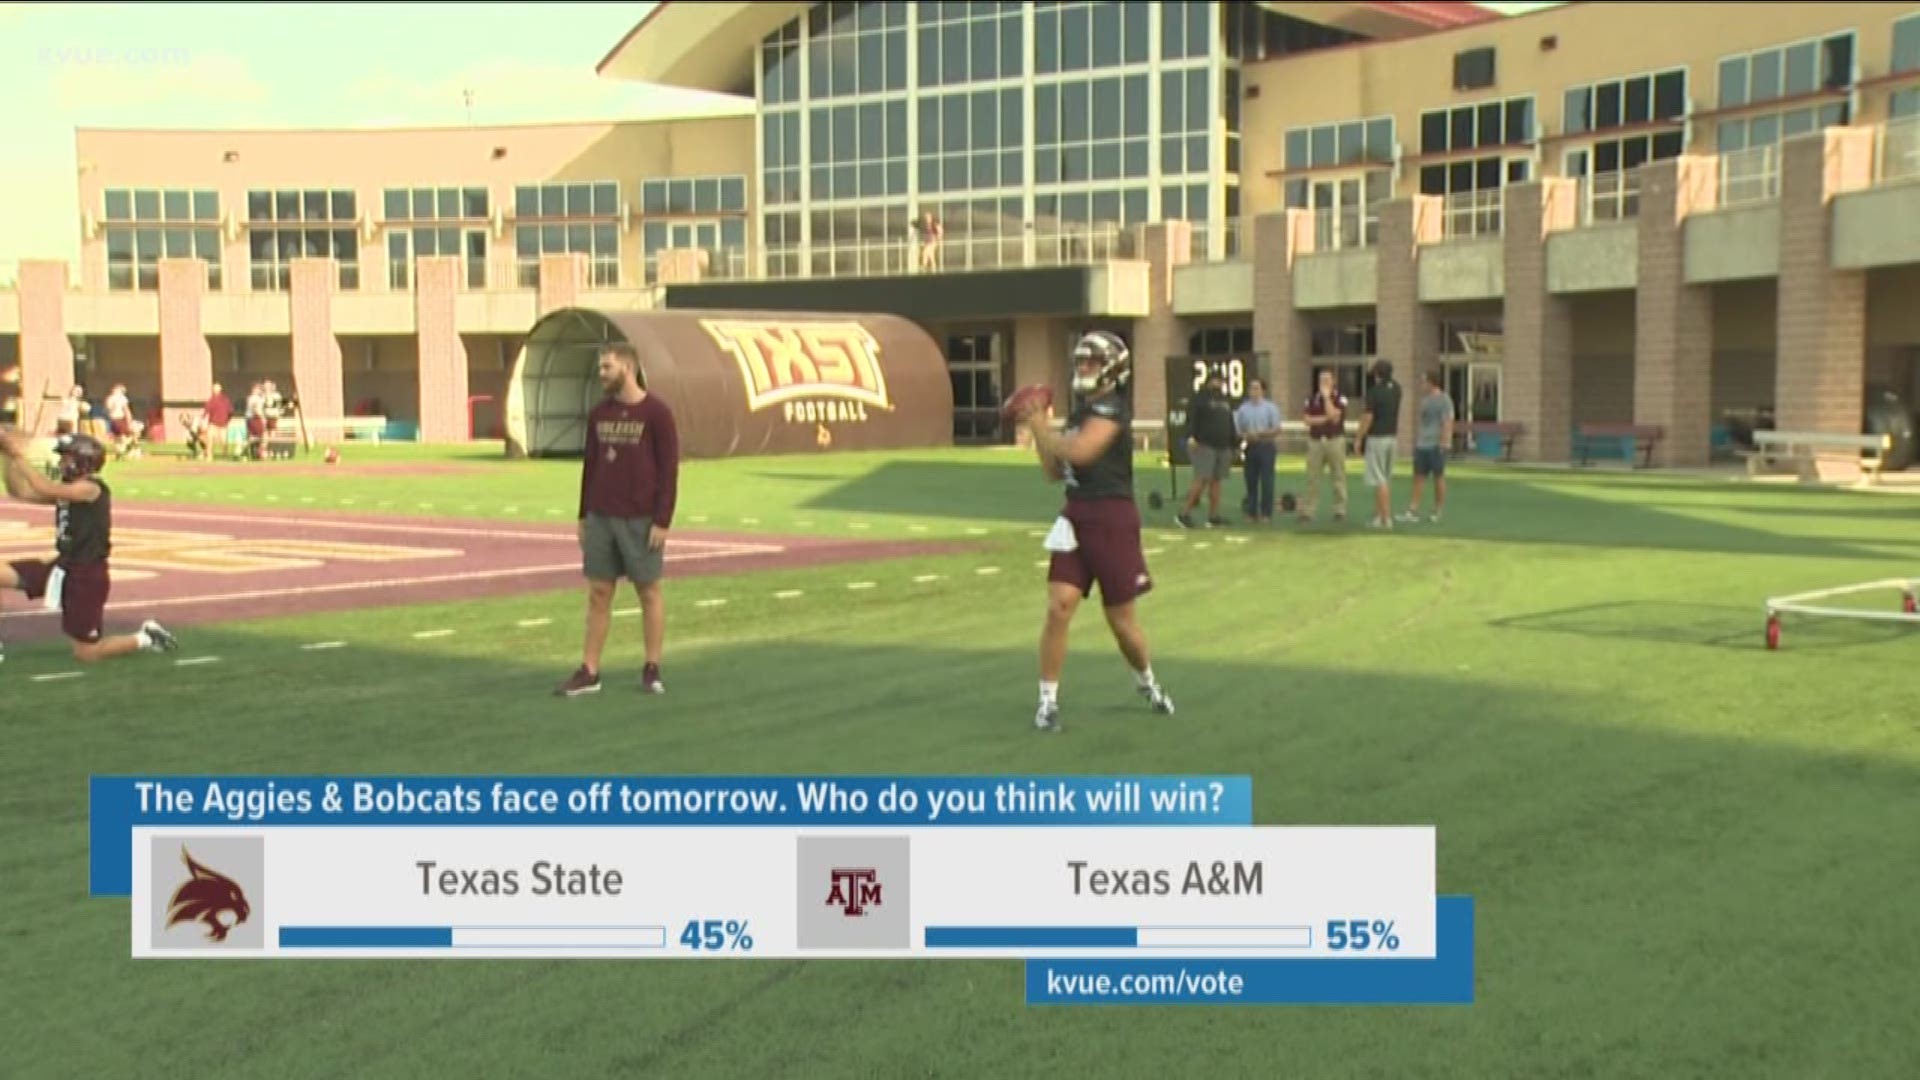 The Texas State Bobcats will travel to play the Texas A&M Aggies on Thursday August 29.